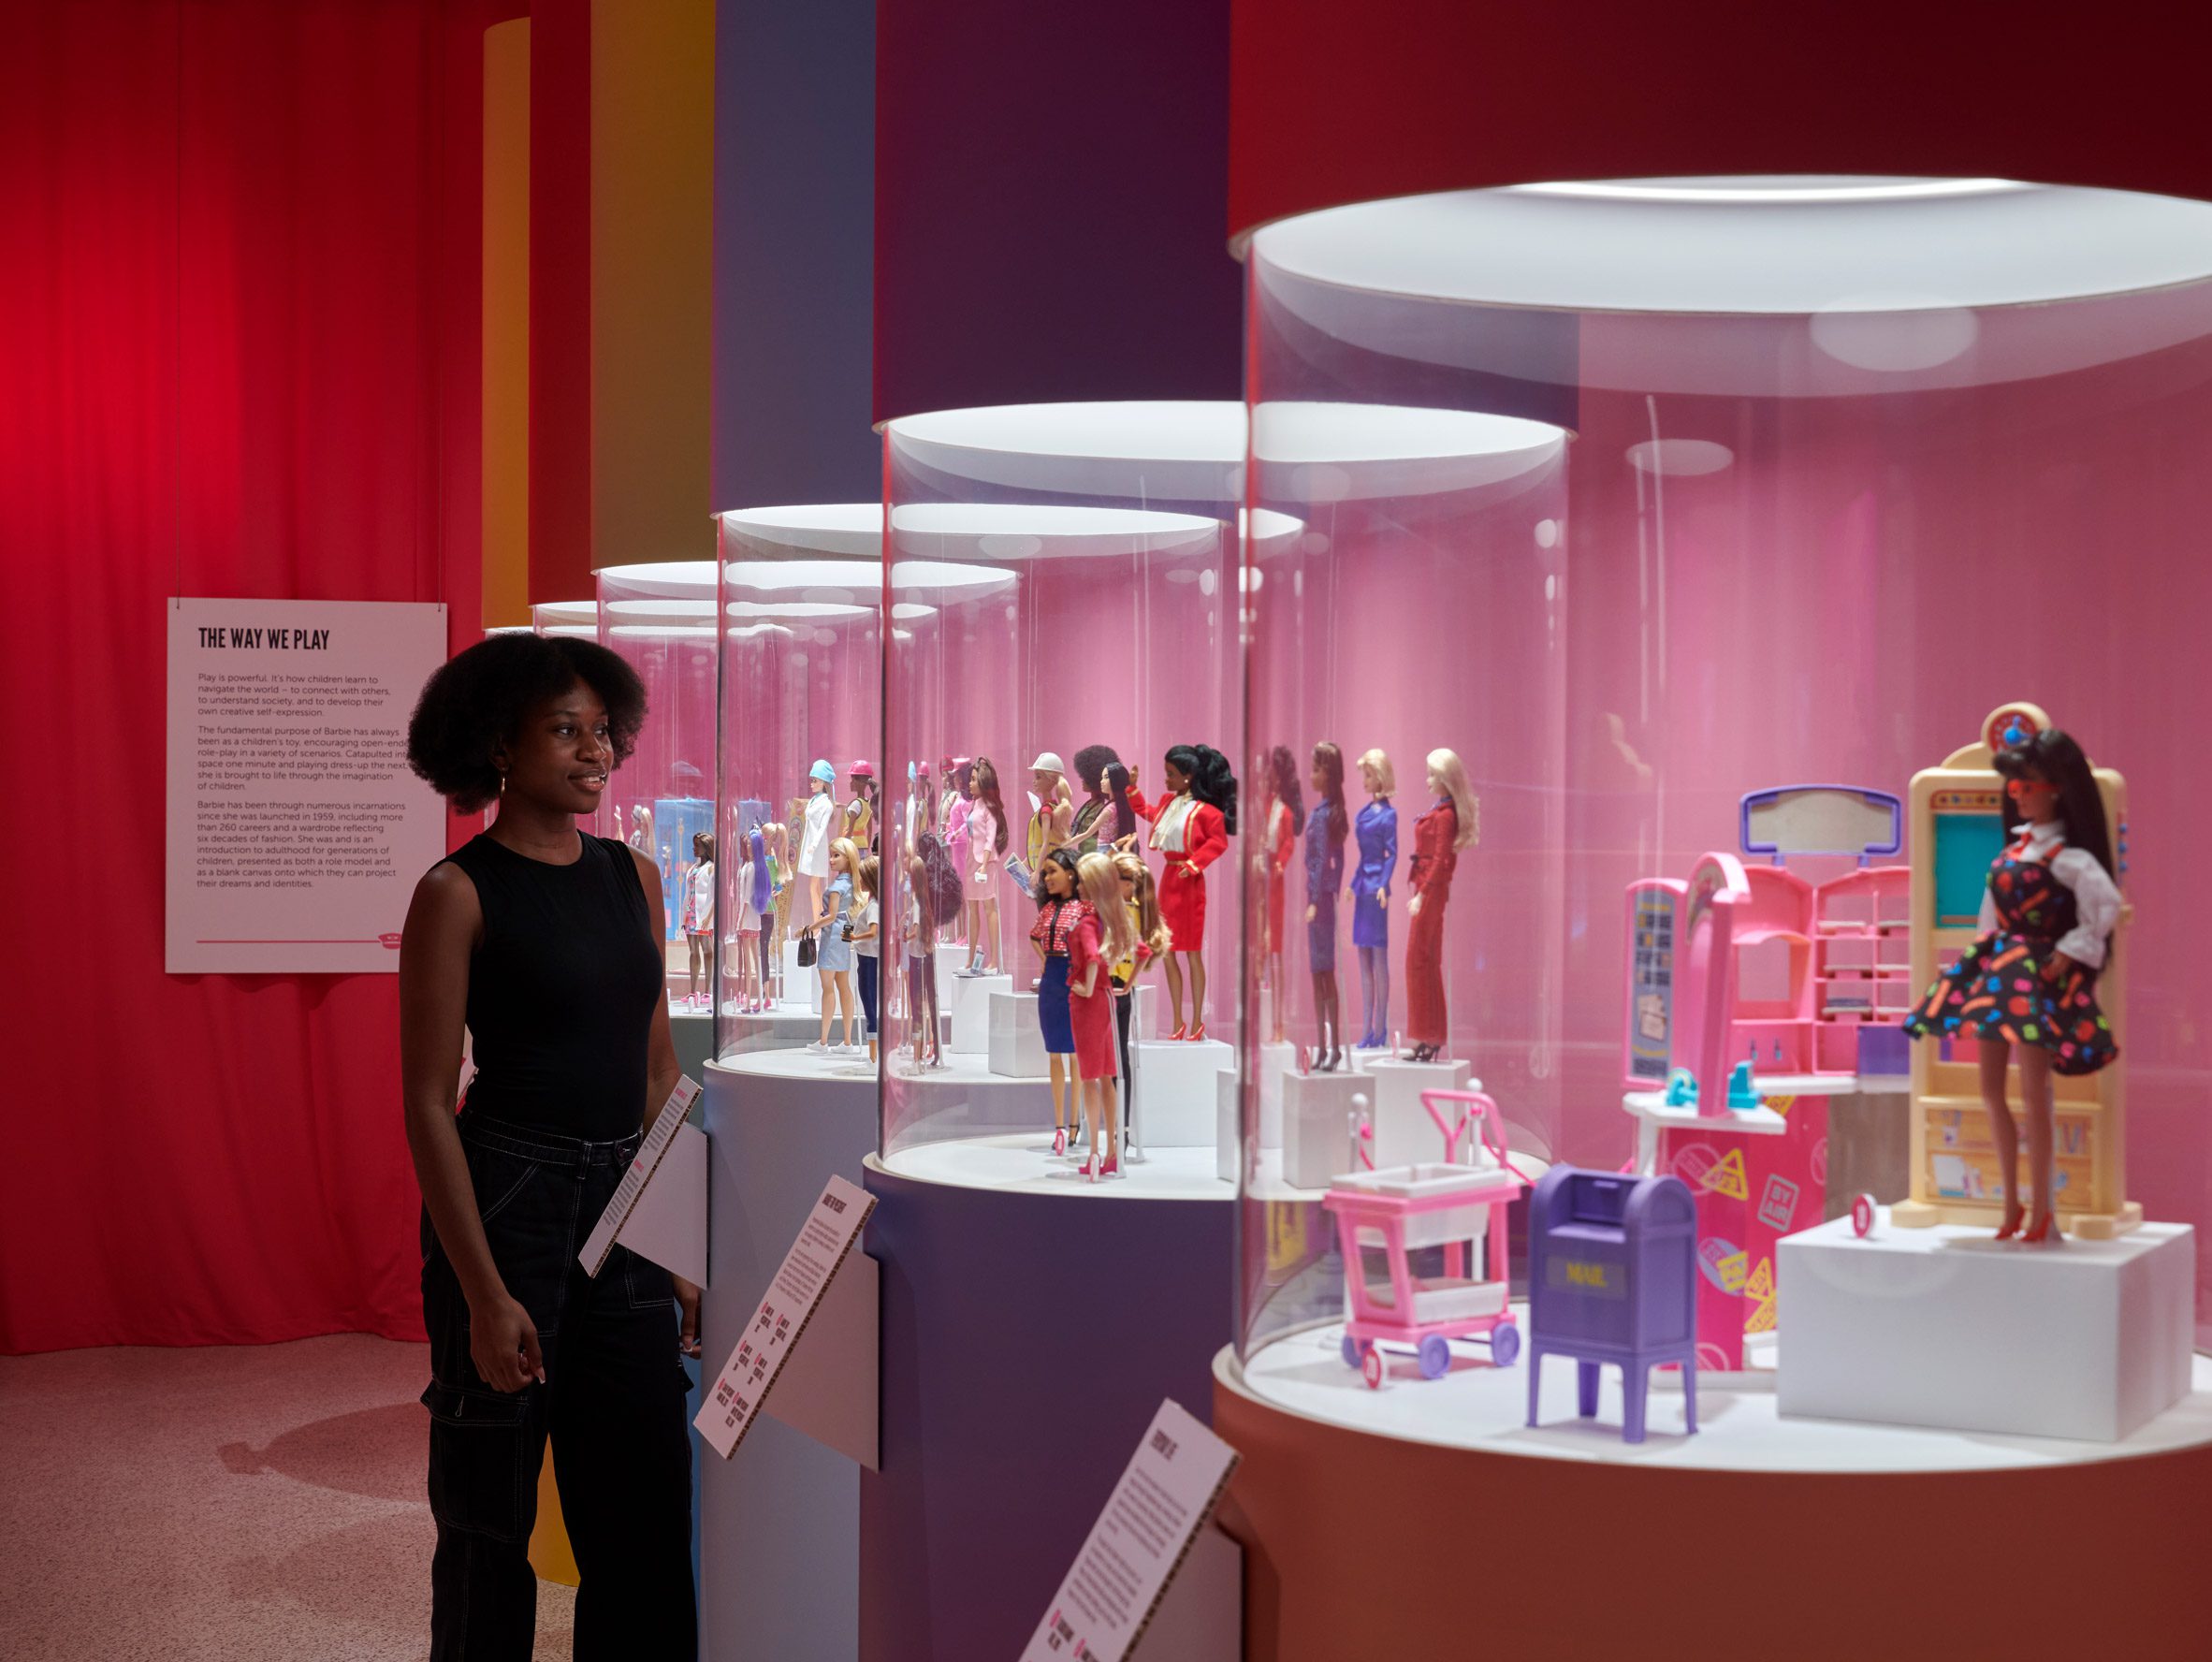 Barbie dolls designed with various careers